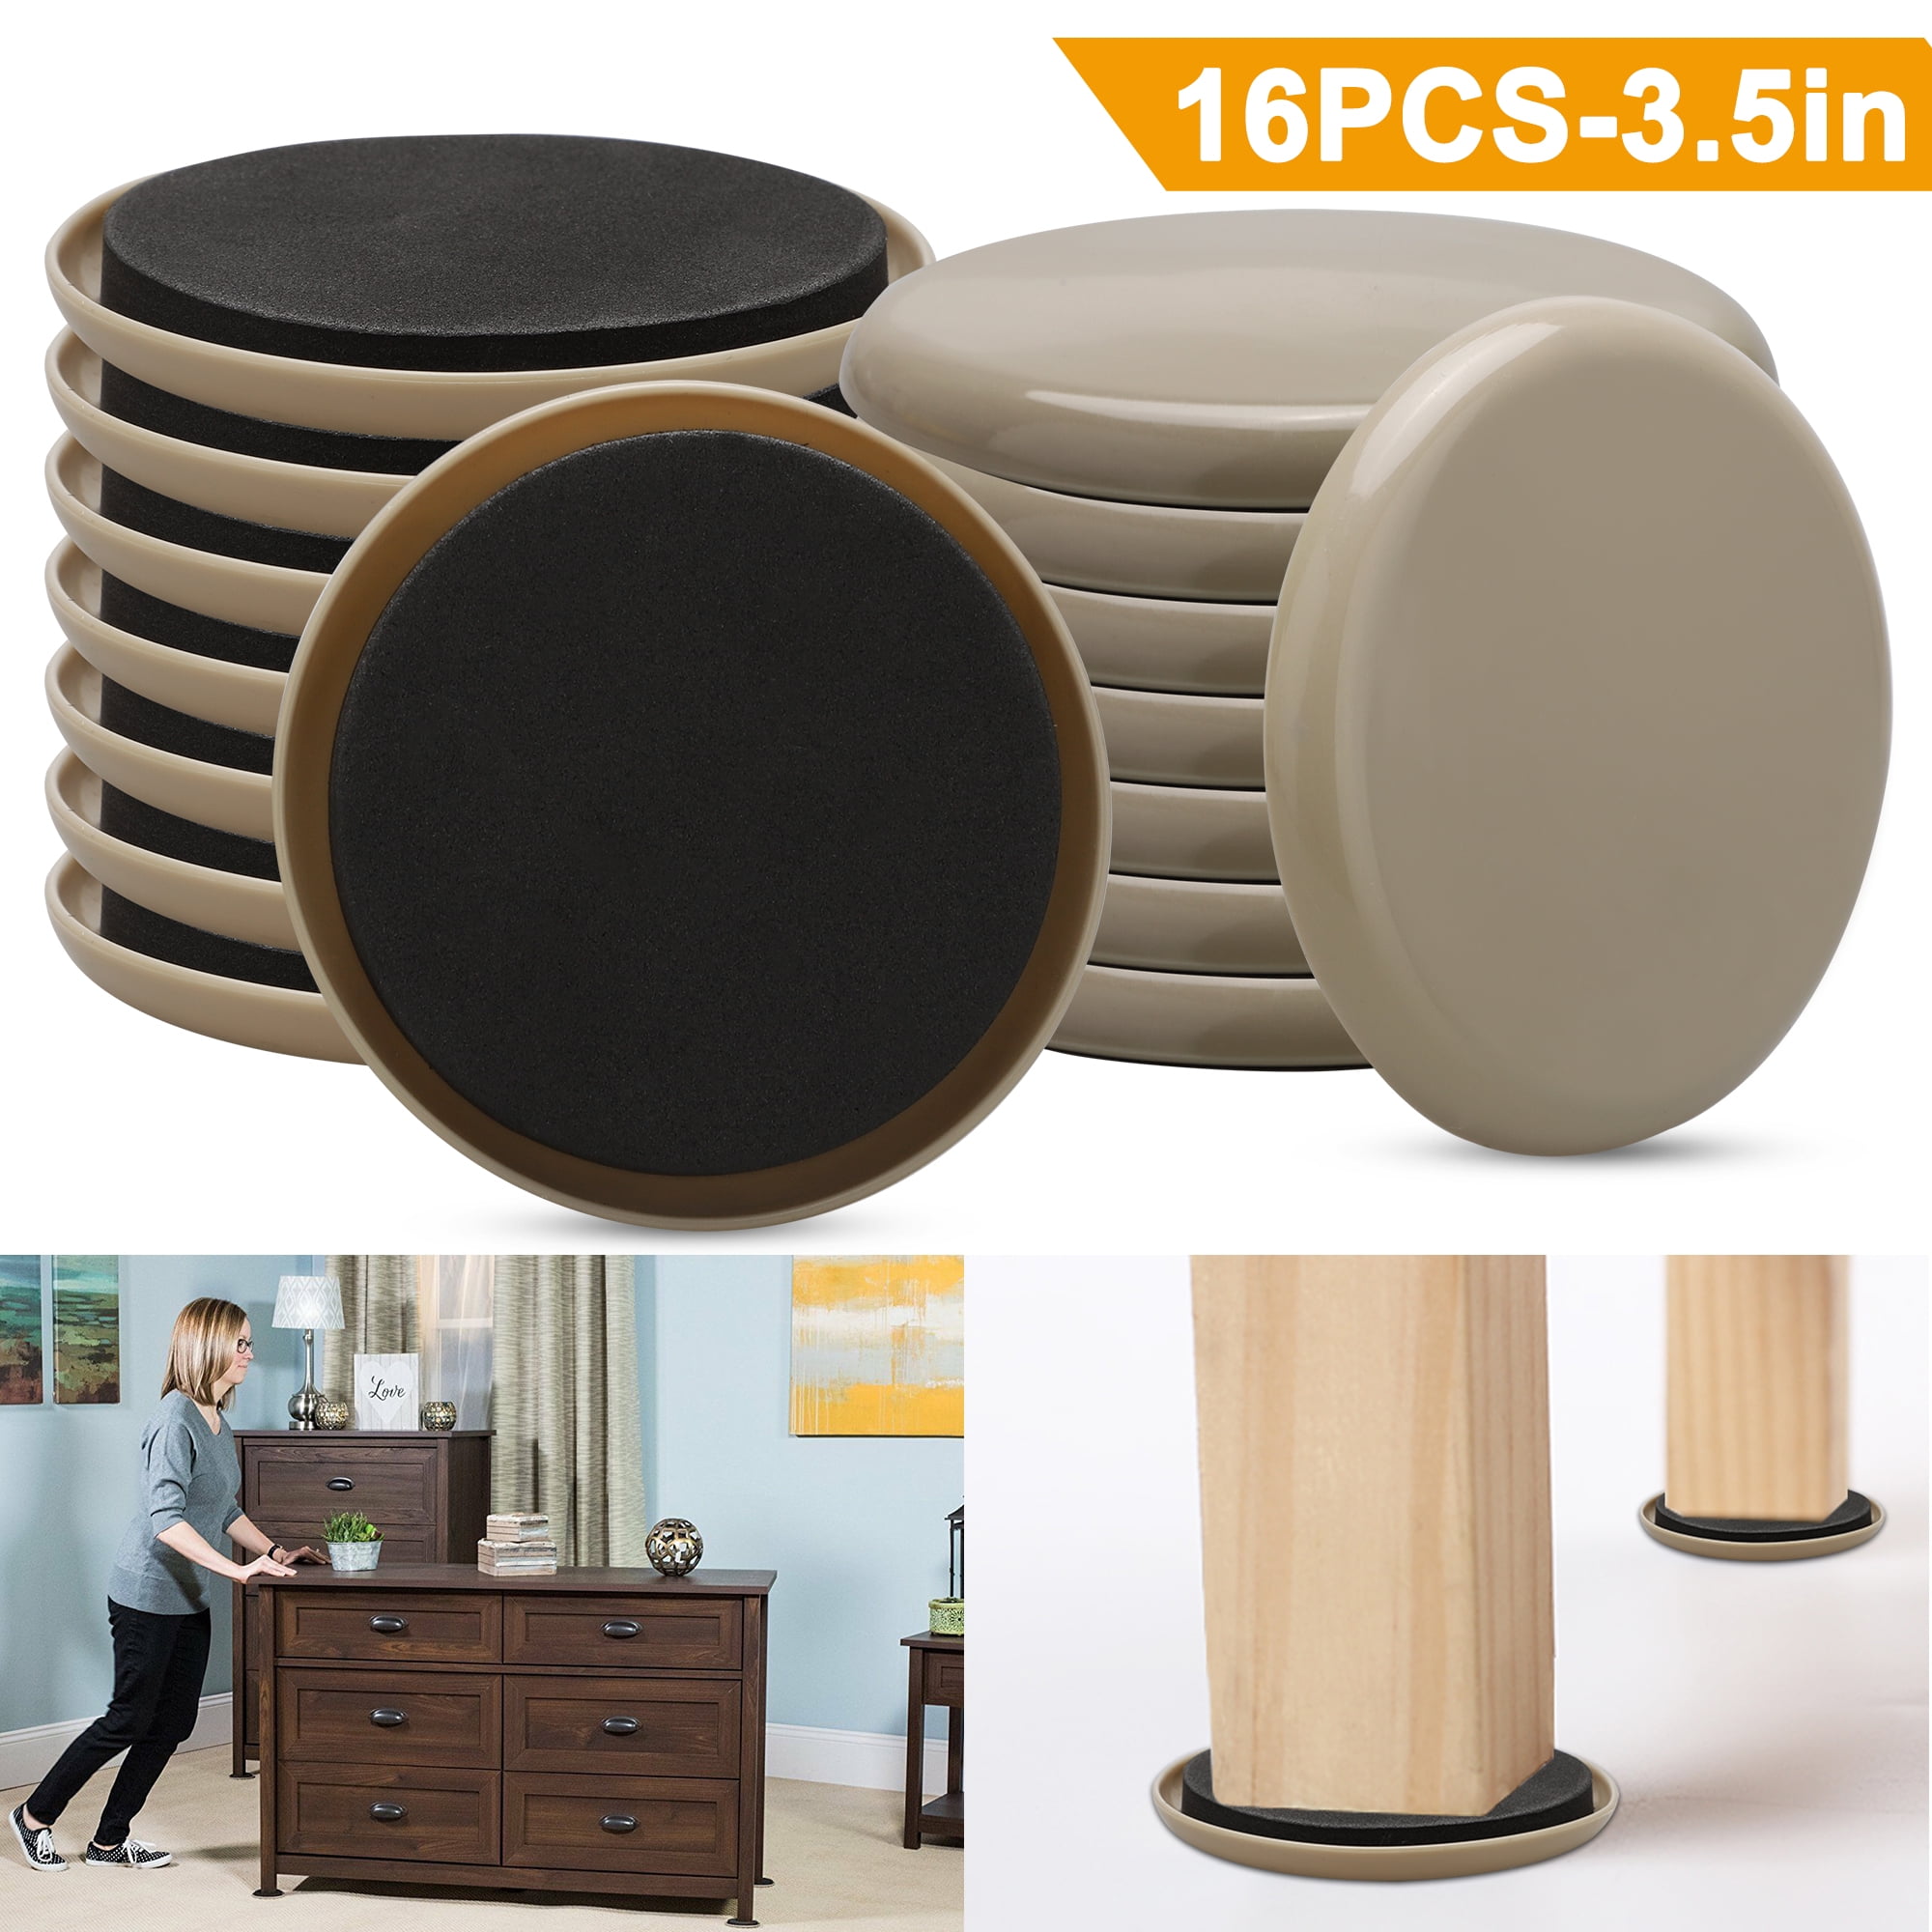 New Space Furniture Sliders, 8pcs 3 1/2 x 6 Oval Reusable Furniture Sliders for Carpet, Heavy-Duty Furniture Movers Sliders - Move Furniture